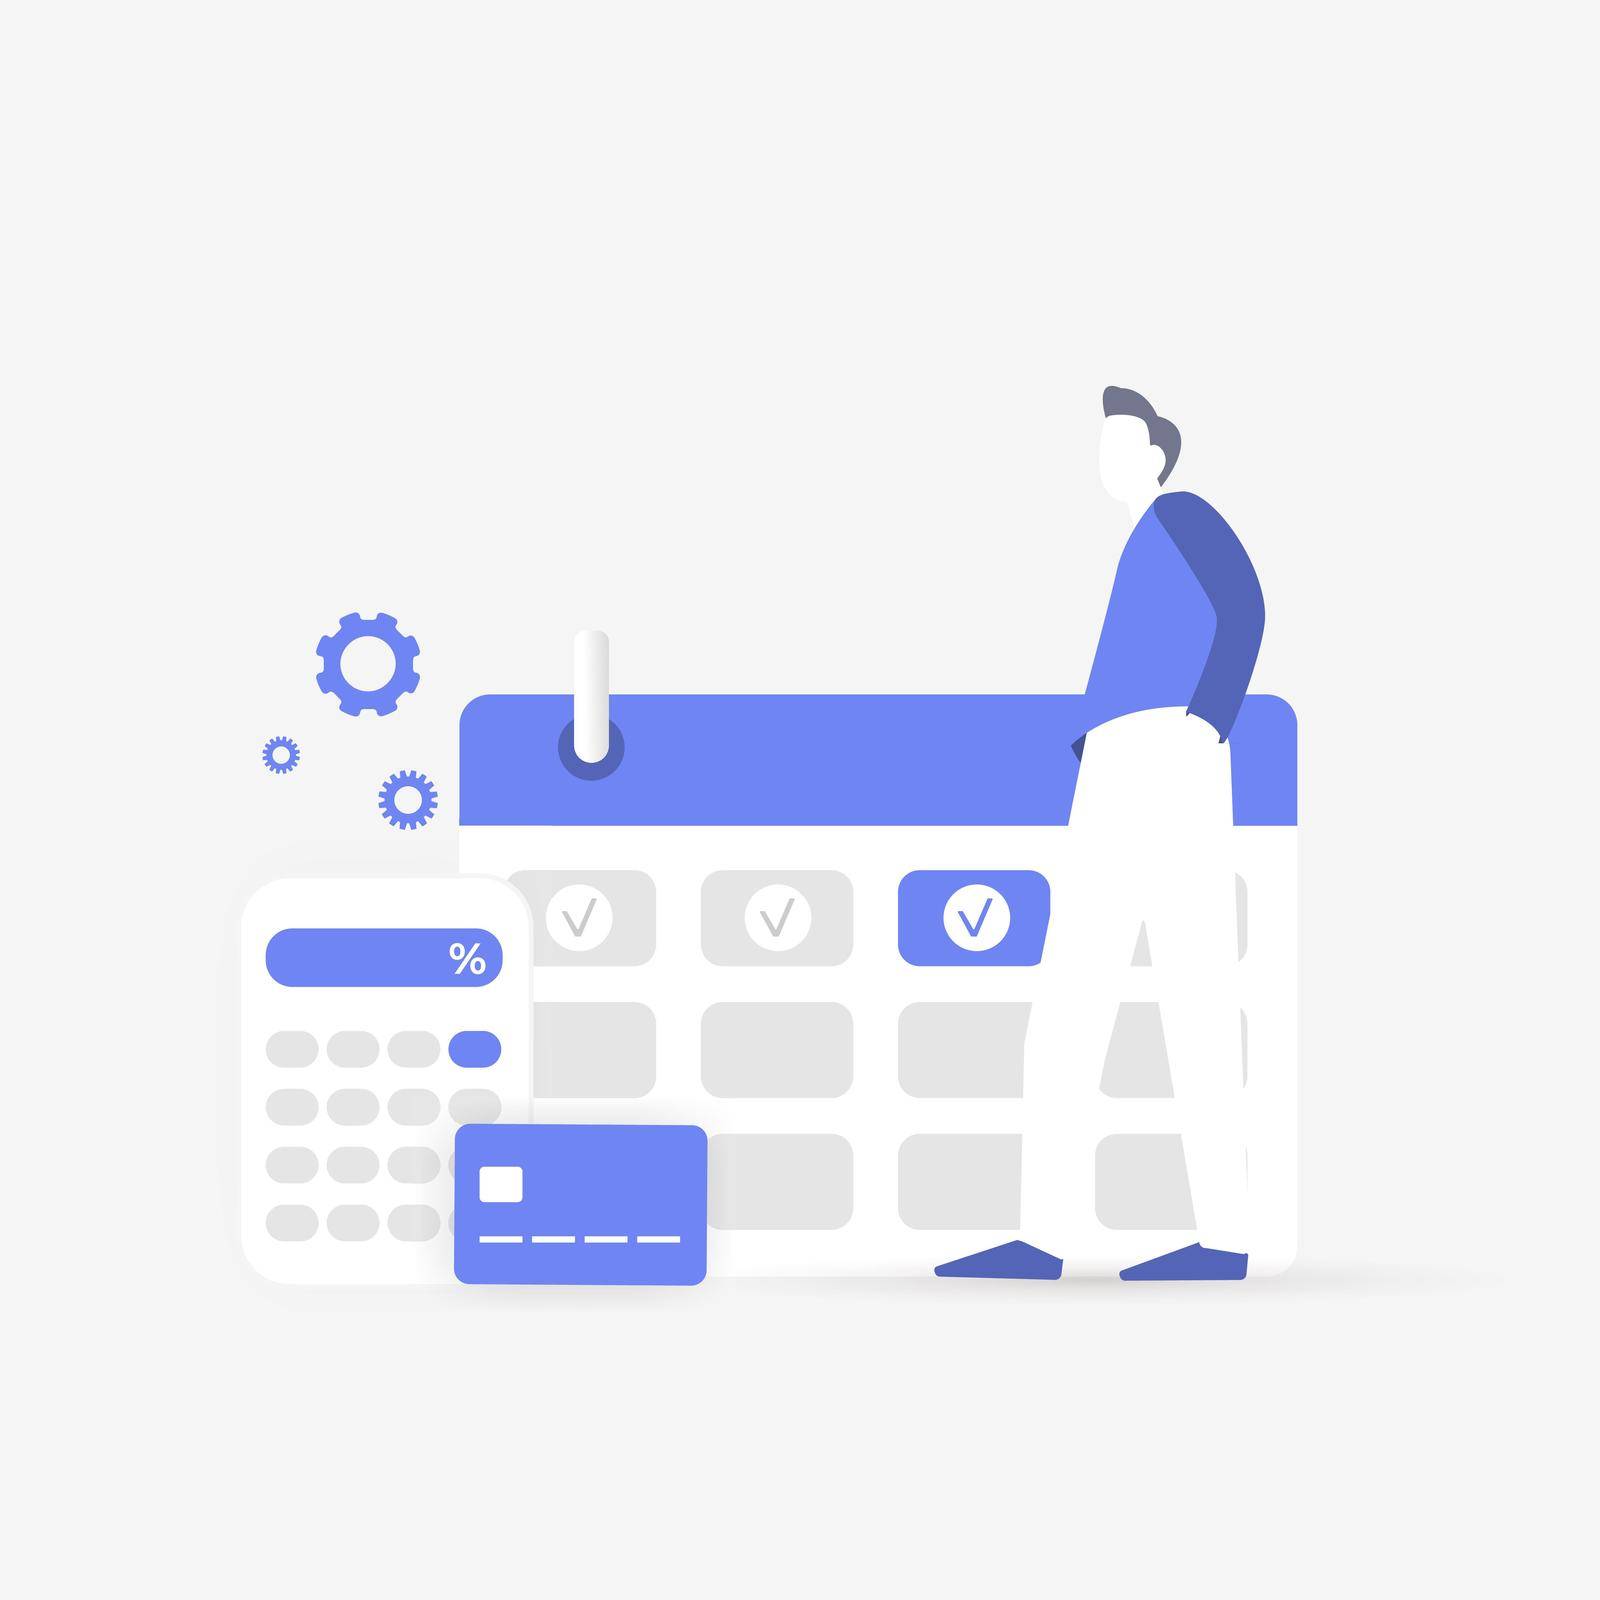 Subscription monthly automatic payment concept illustration. Calendar icon with a recurring monthly payment date, calculator and credit bank card. Paid member subscription business model for services.